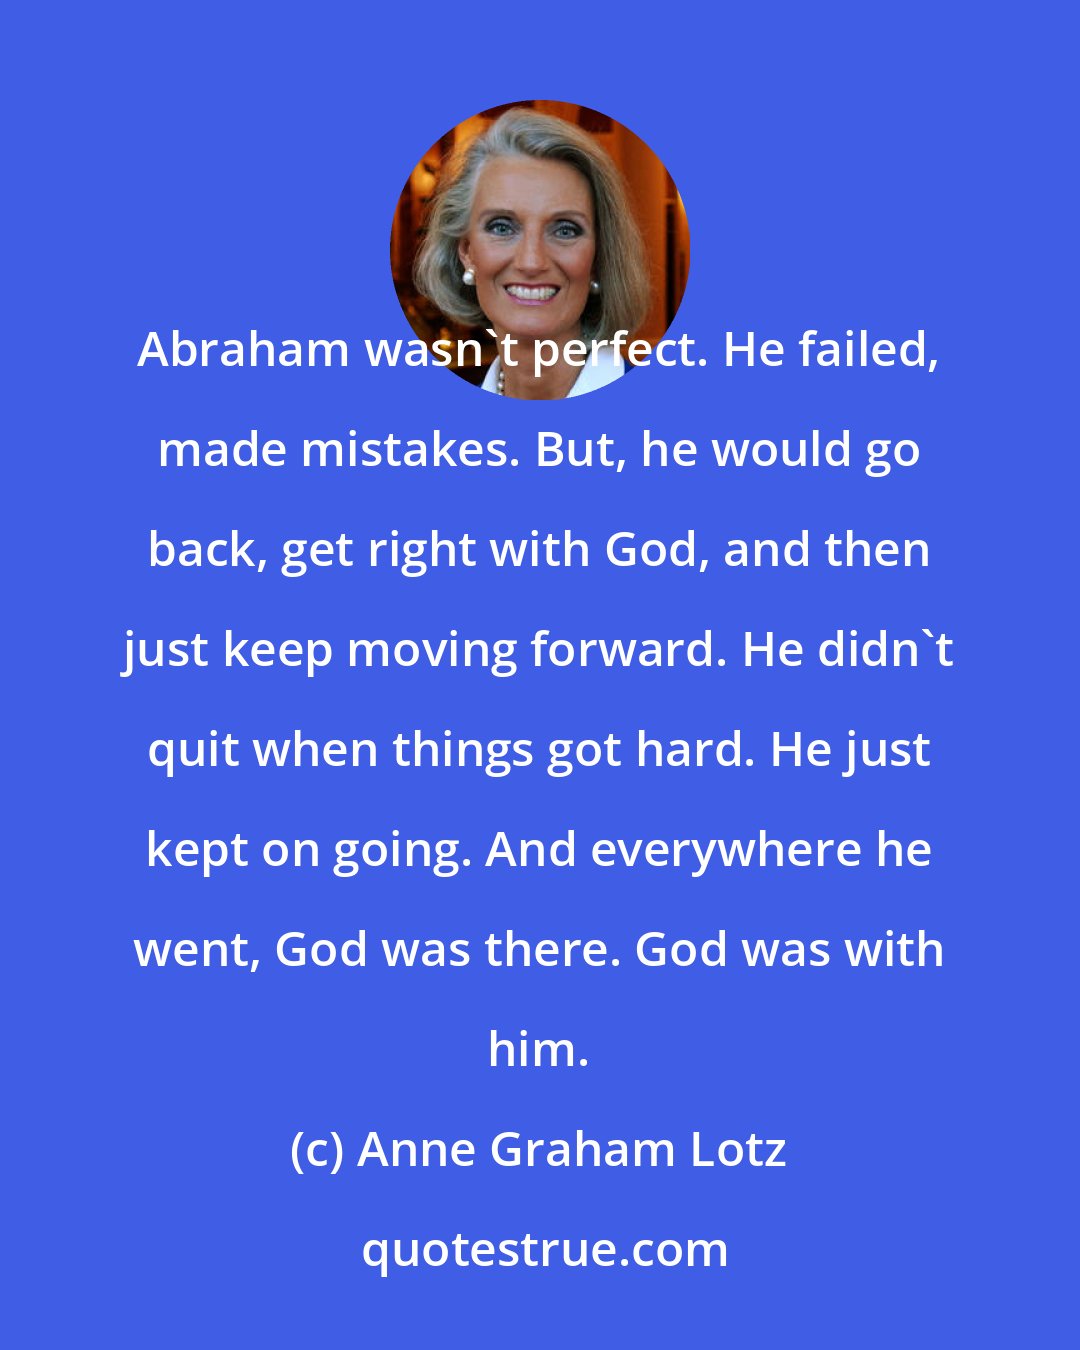 Anne Graham Lotz: Abraham wasn't perfect. He failed, made mistakes. But, he would go back, get right with God, and then just keep moving forward. He didn't quit when things got hard. He just kept on going. And everywhere he went, God was there. God was with him.